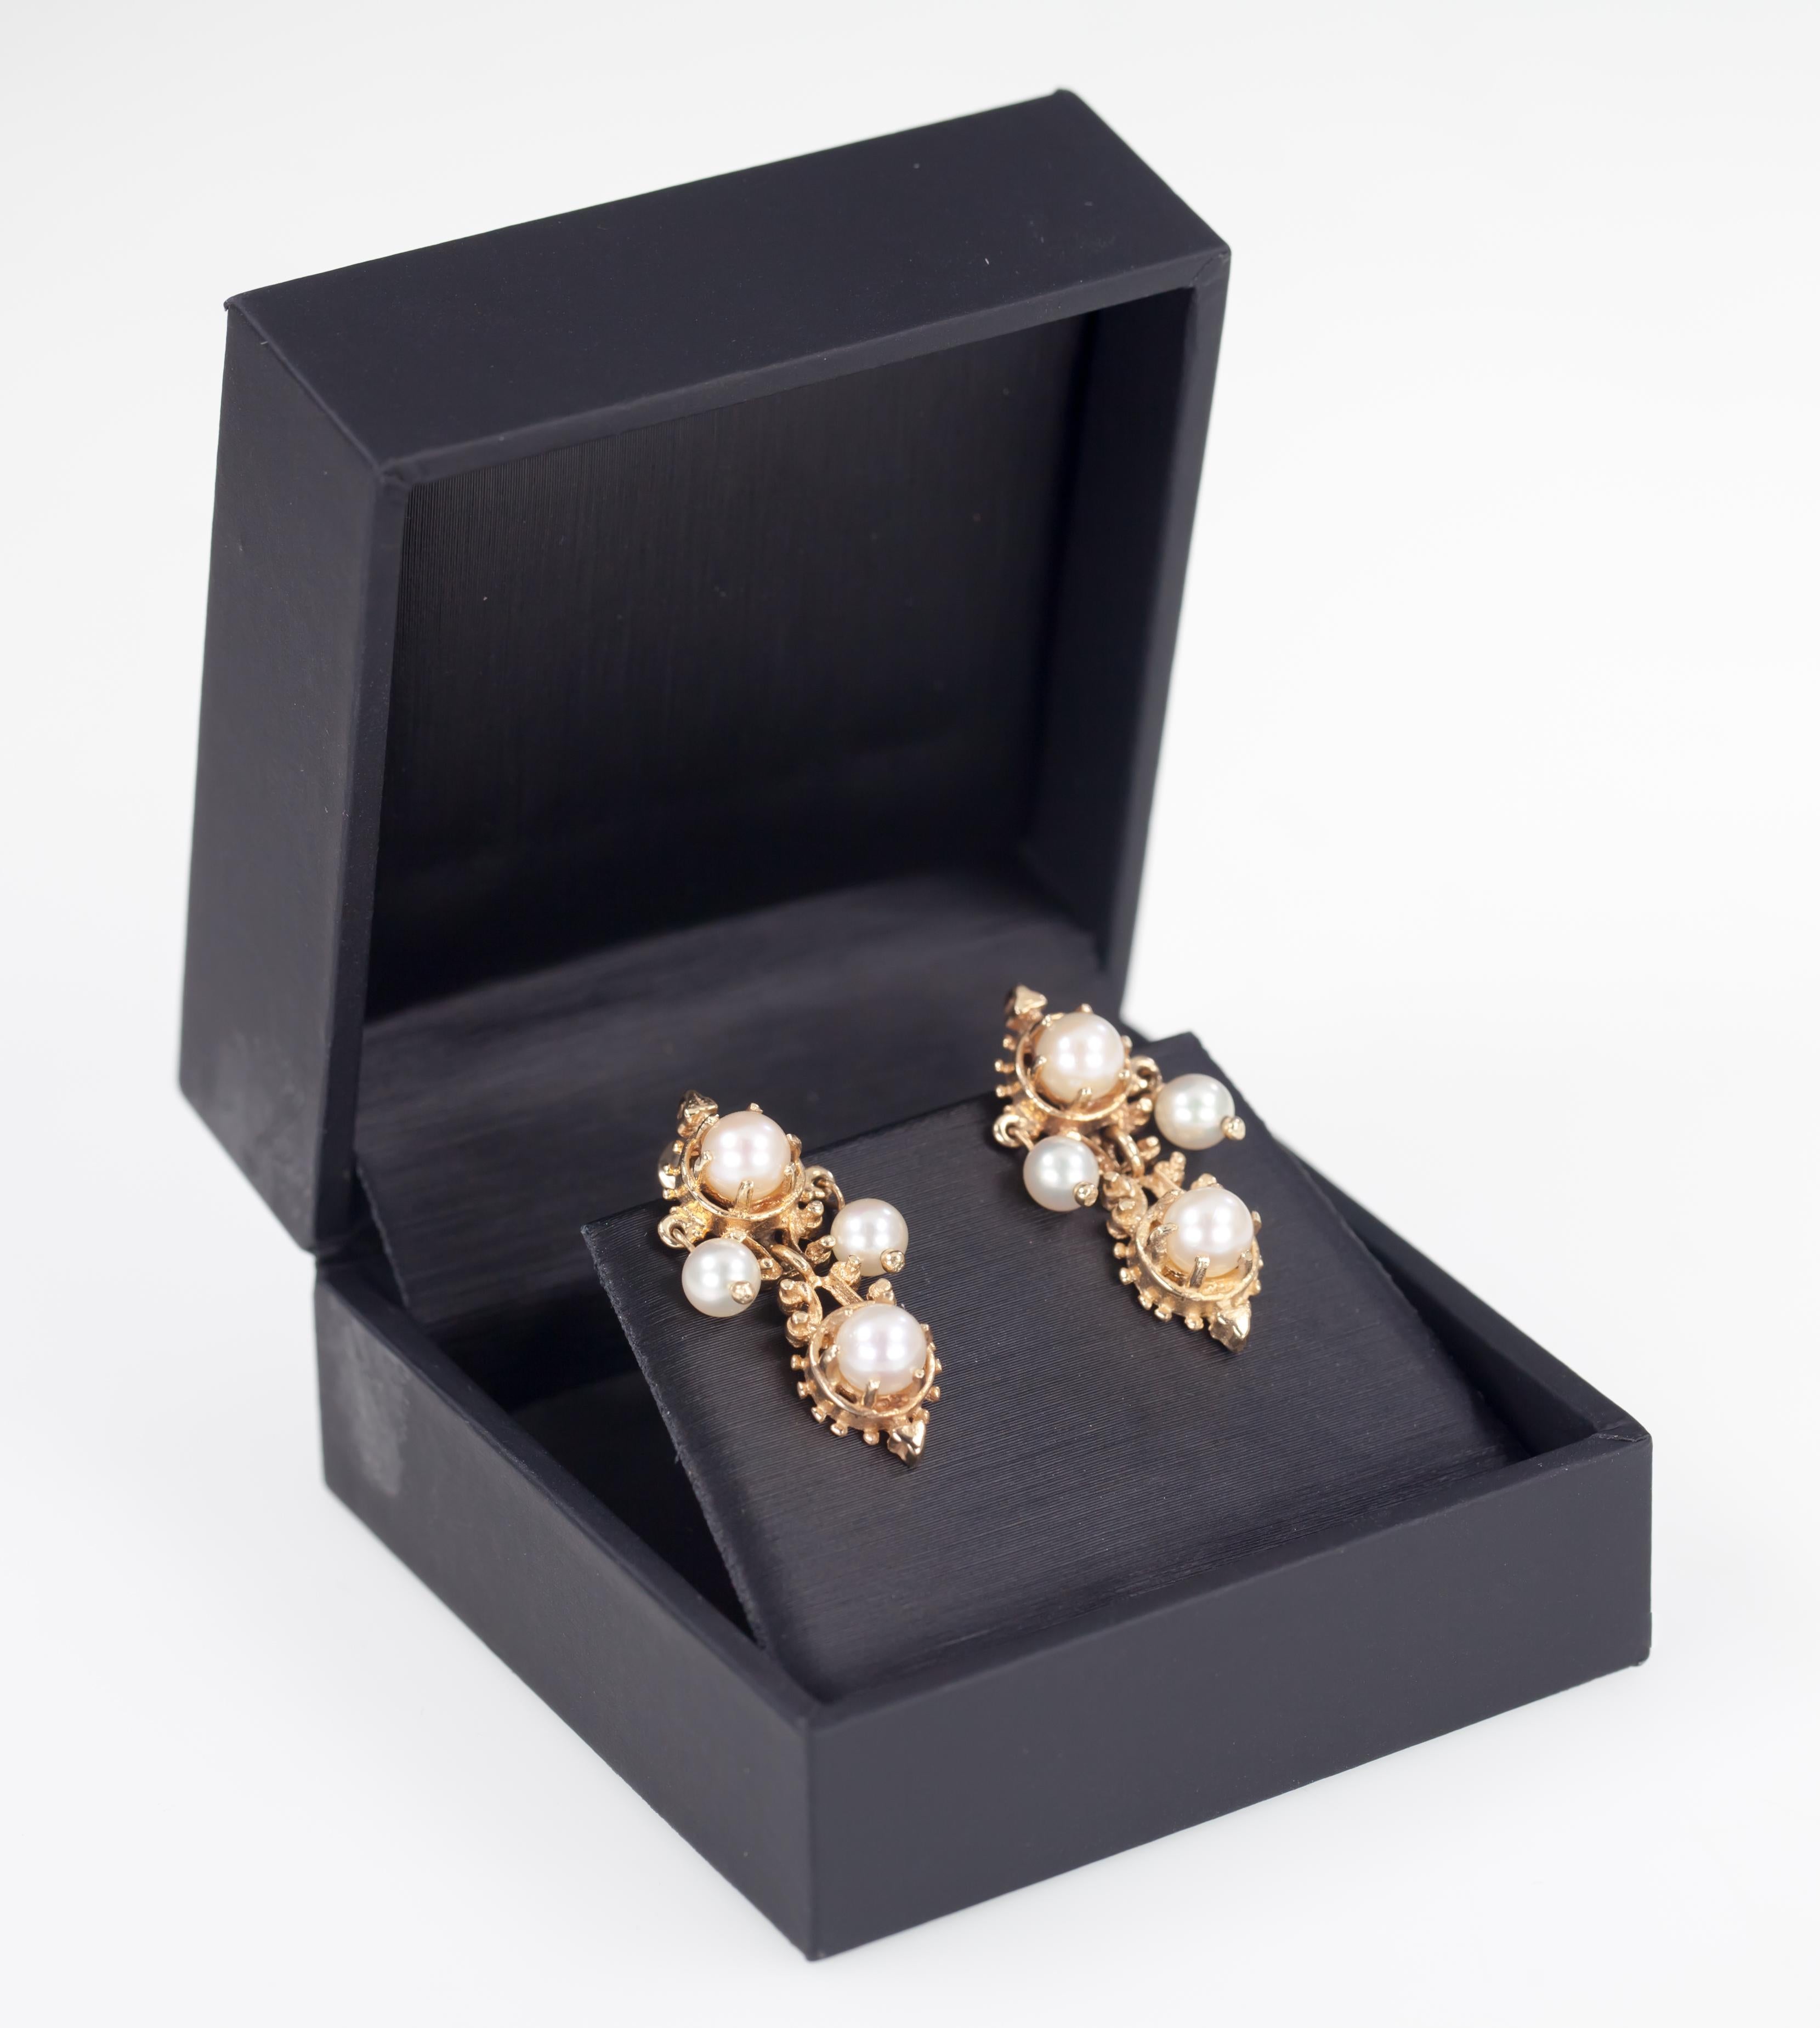 Gorgeous, Ornate 14k Gold Earrings
Feature 8 Total Pearls Ranging in Size from 4 - 5 mm
Total Length of Drop = 25 mm
Total Mass = 6.4 grams
Beautiful Gift!